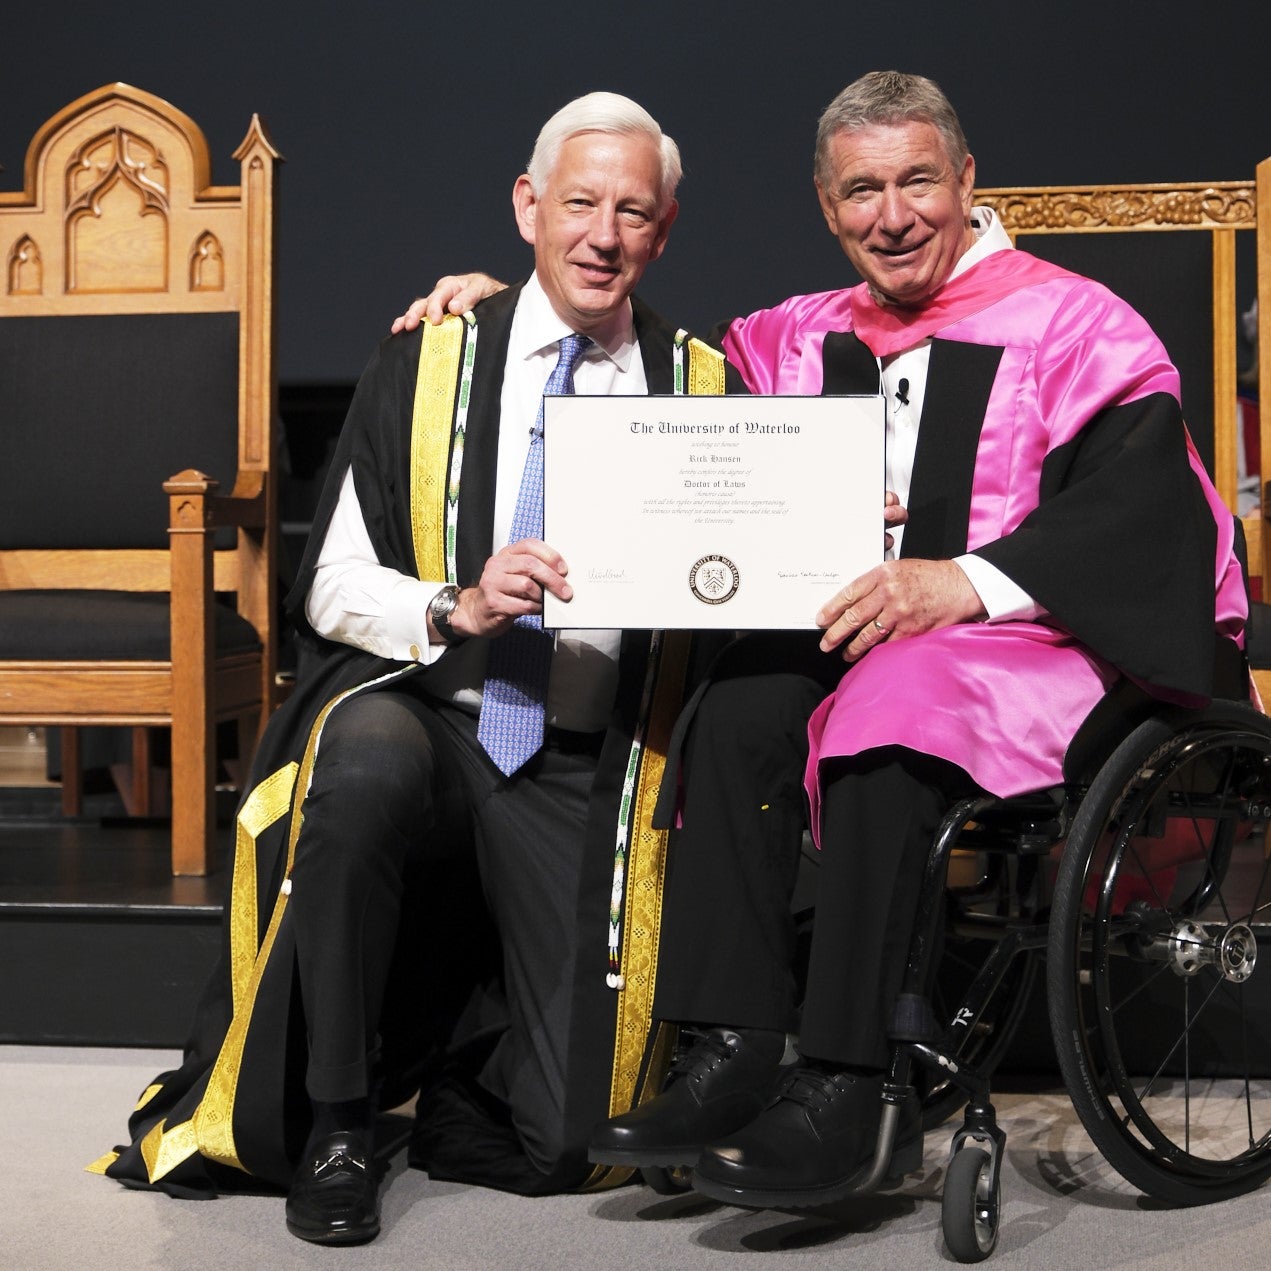 Rick Hansen receives his honorary doctorate diploma from Chancellor Dominic Barton